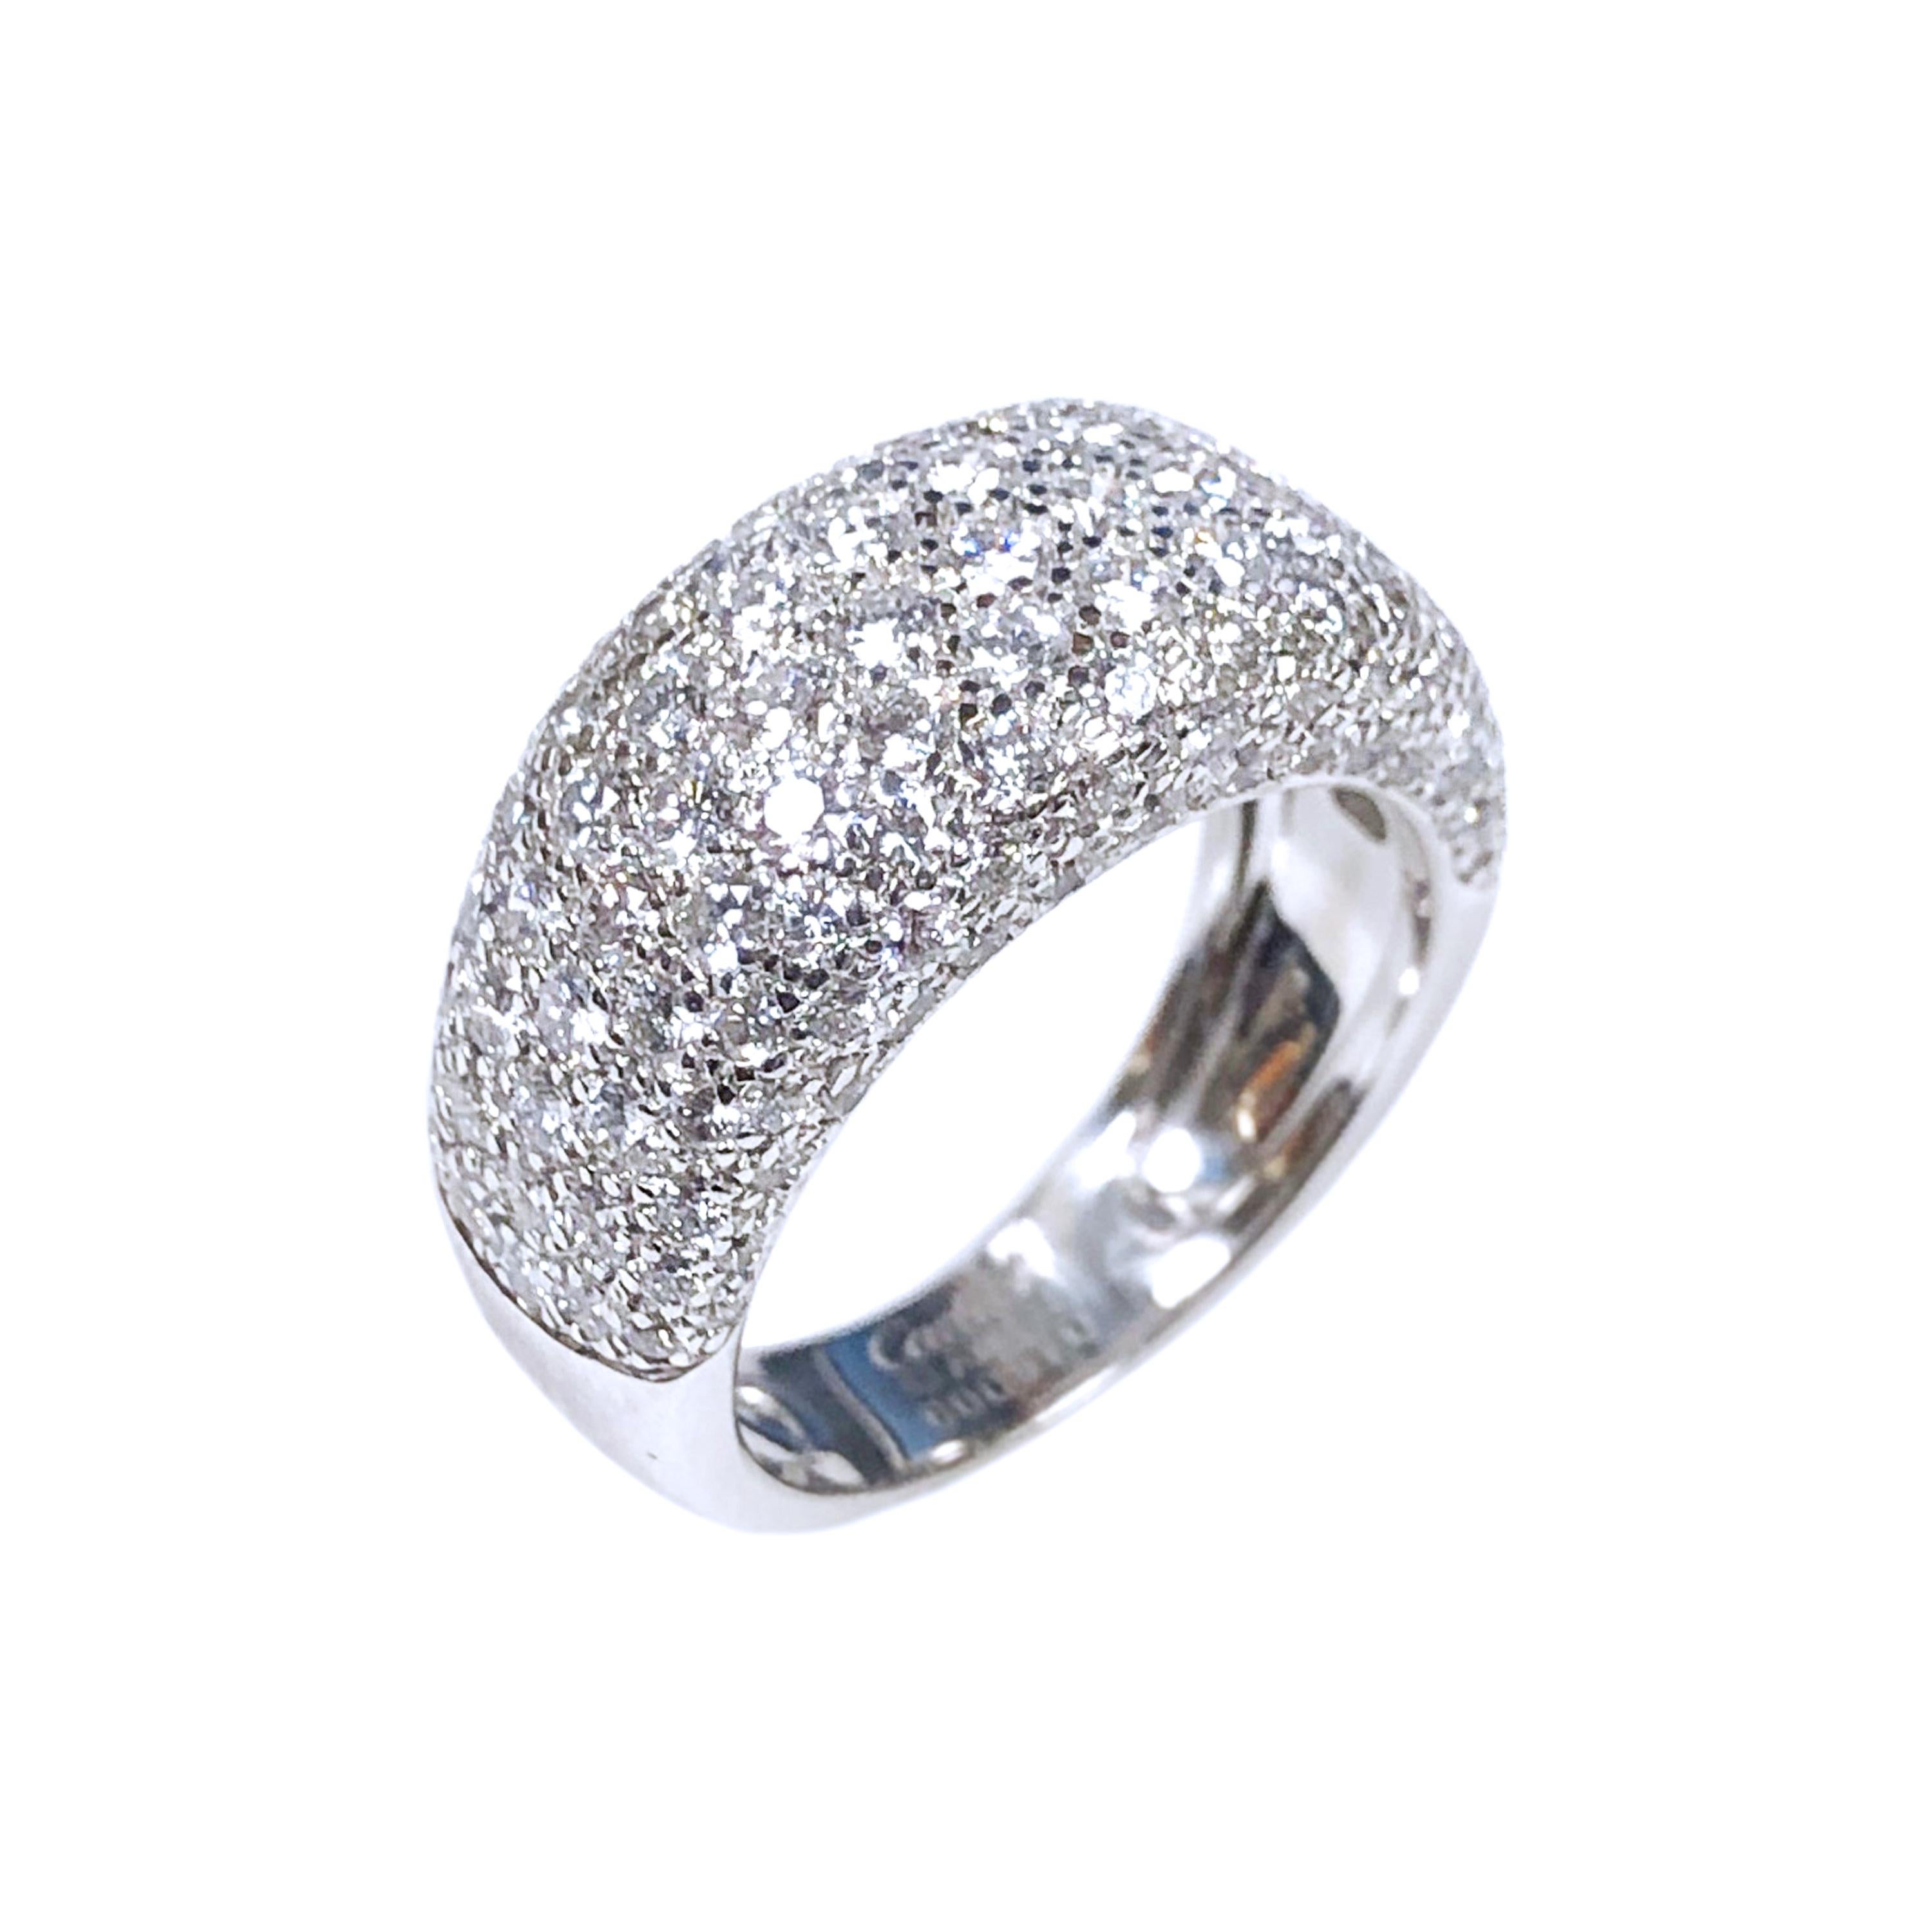 Cartier Nouvelle Vague White Gold and Diamond Pave Dome Ring